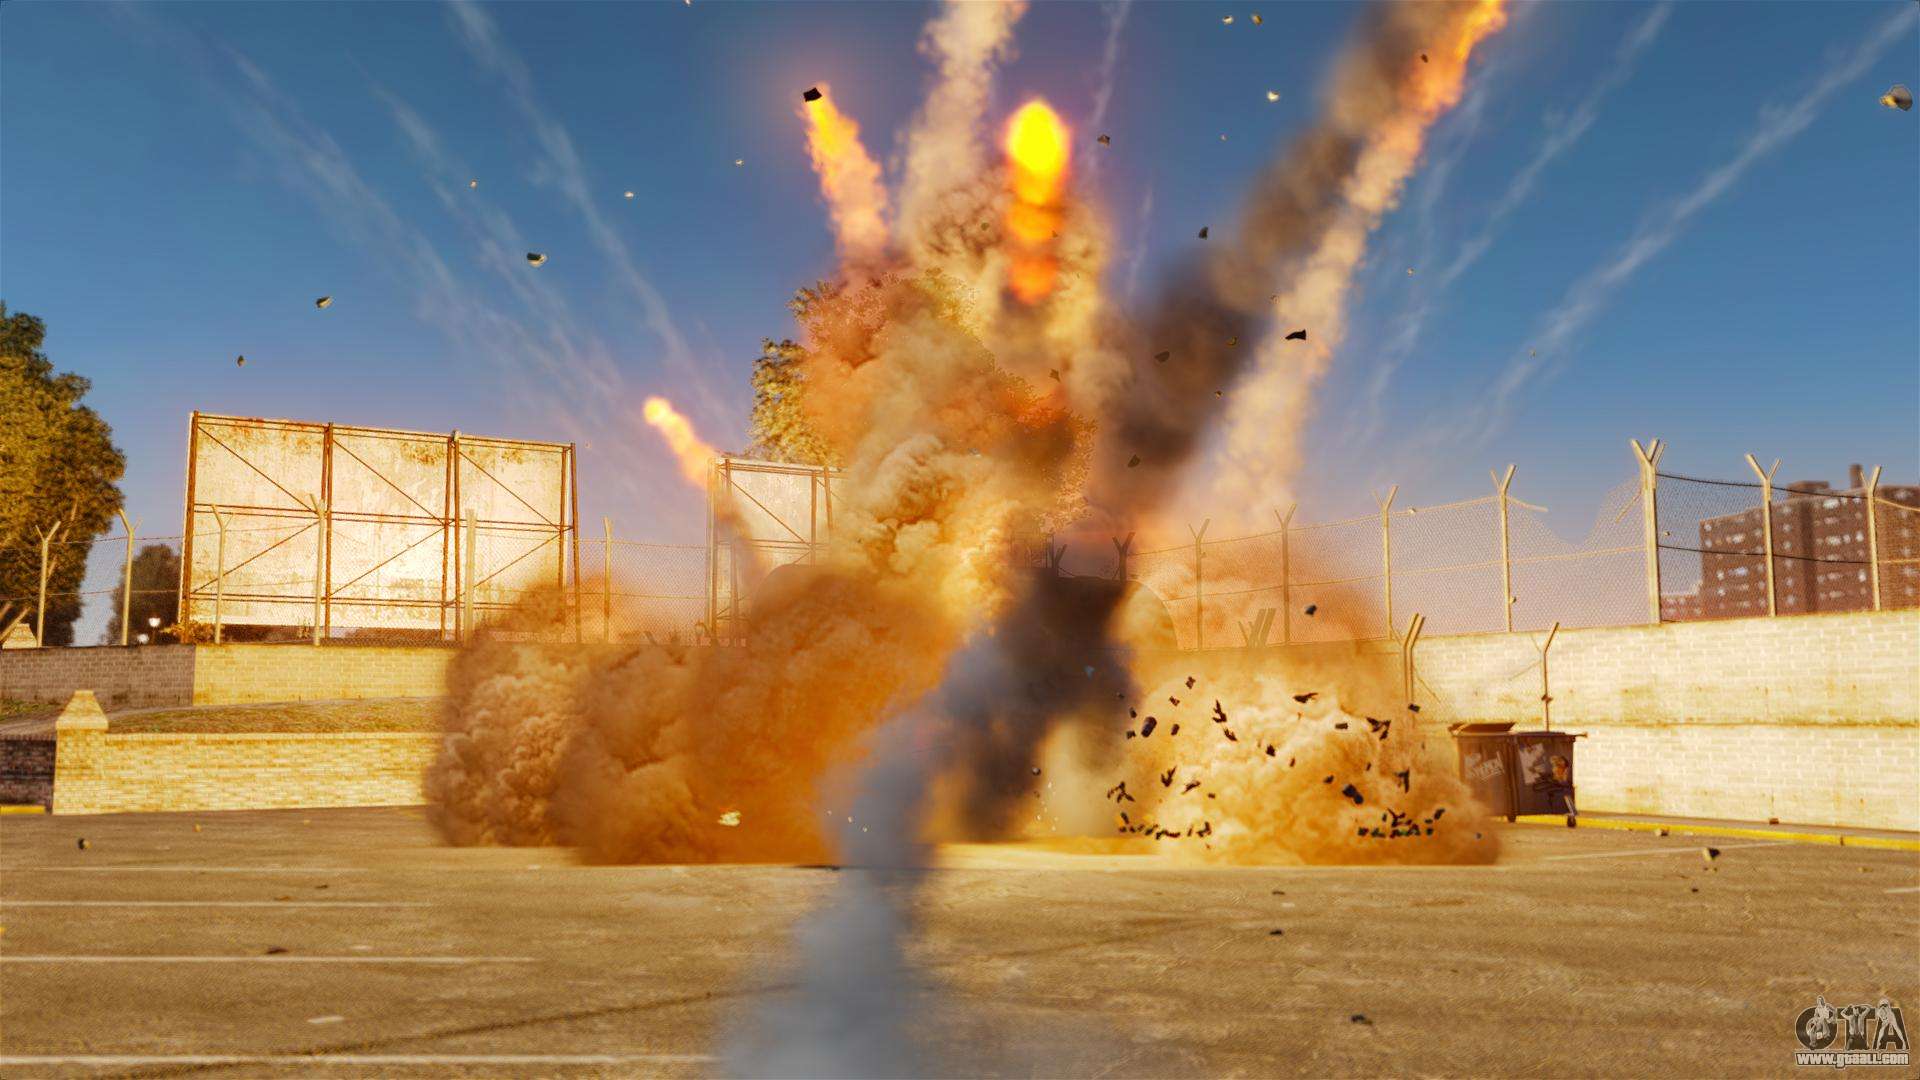 The new setting of fires and explosions for GTA 4 - 1920 x 1080 jpeg 196kB